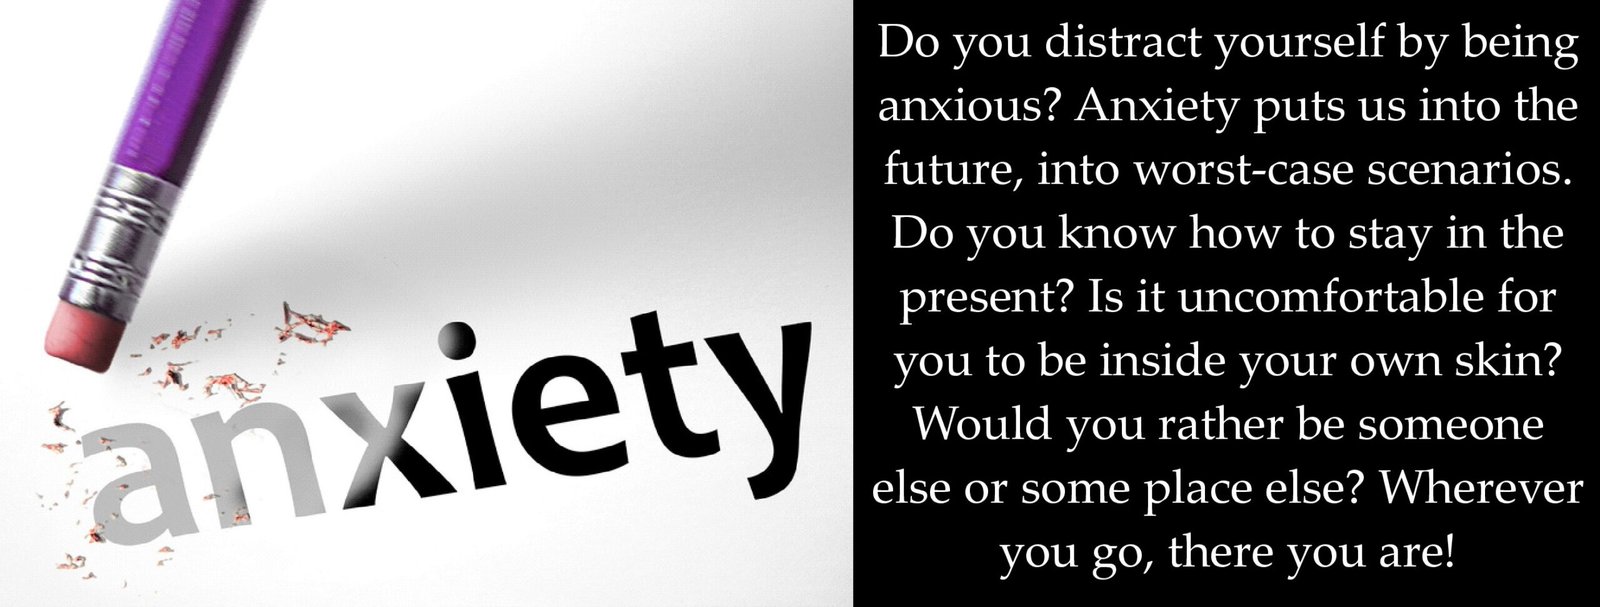 Do you distract yourself by being anxious